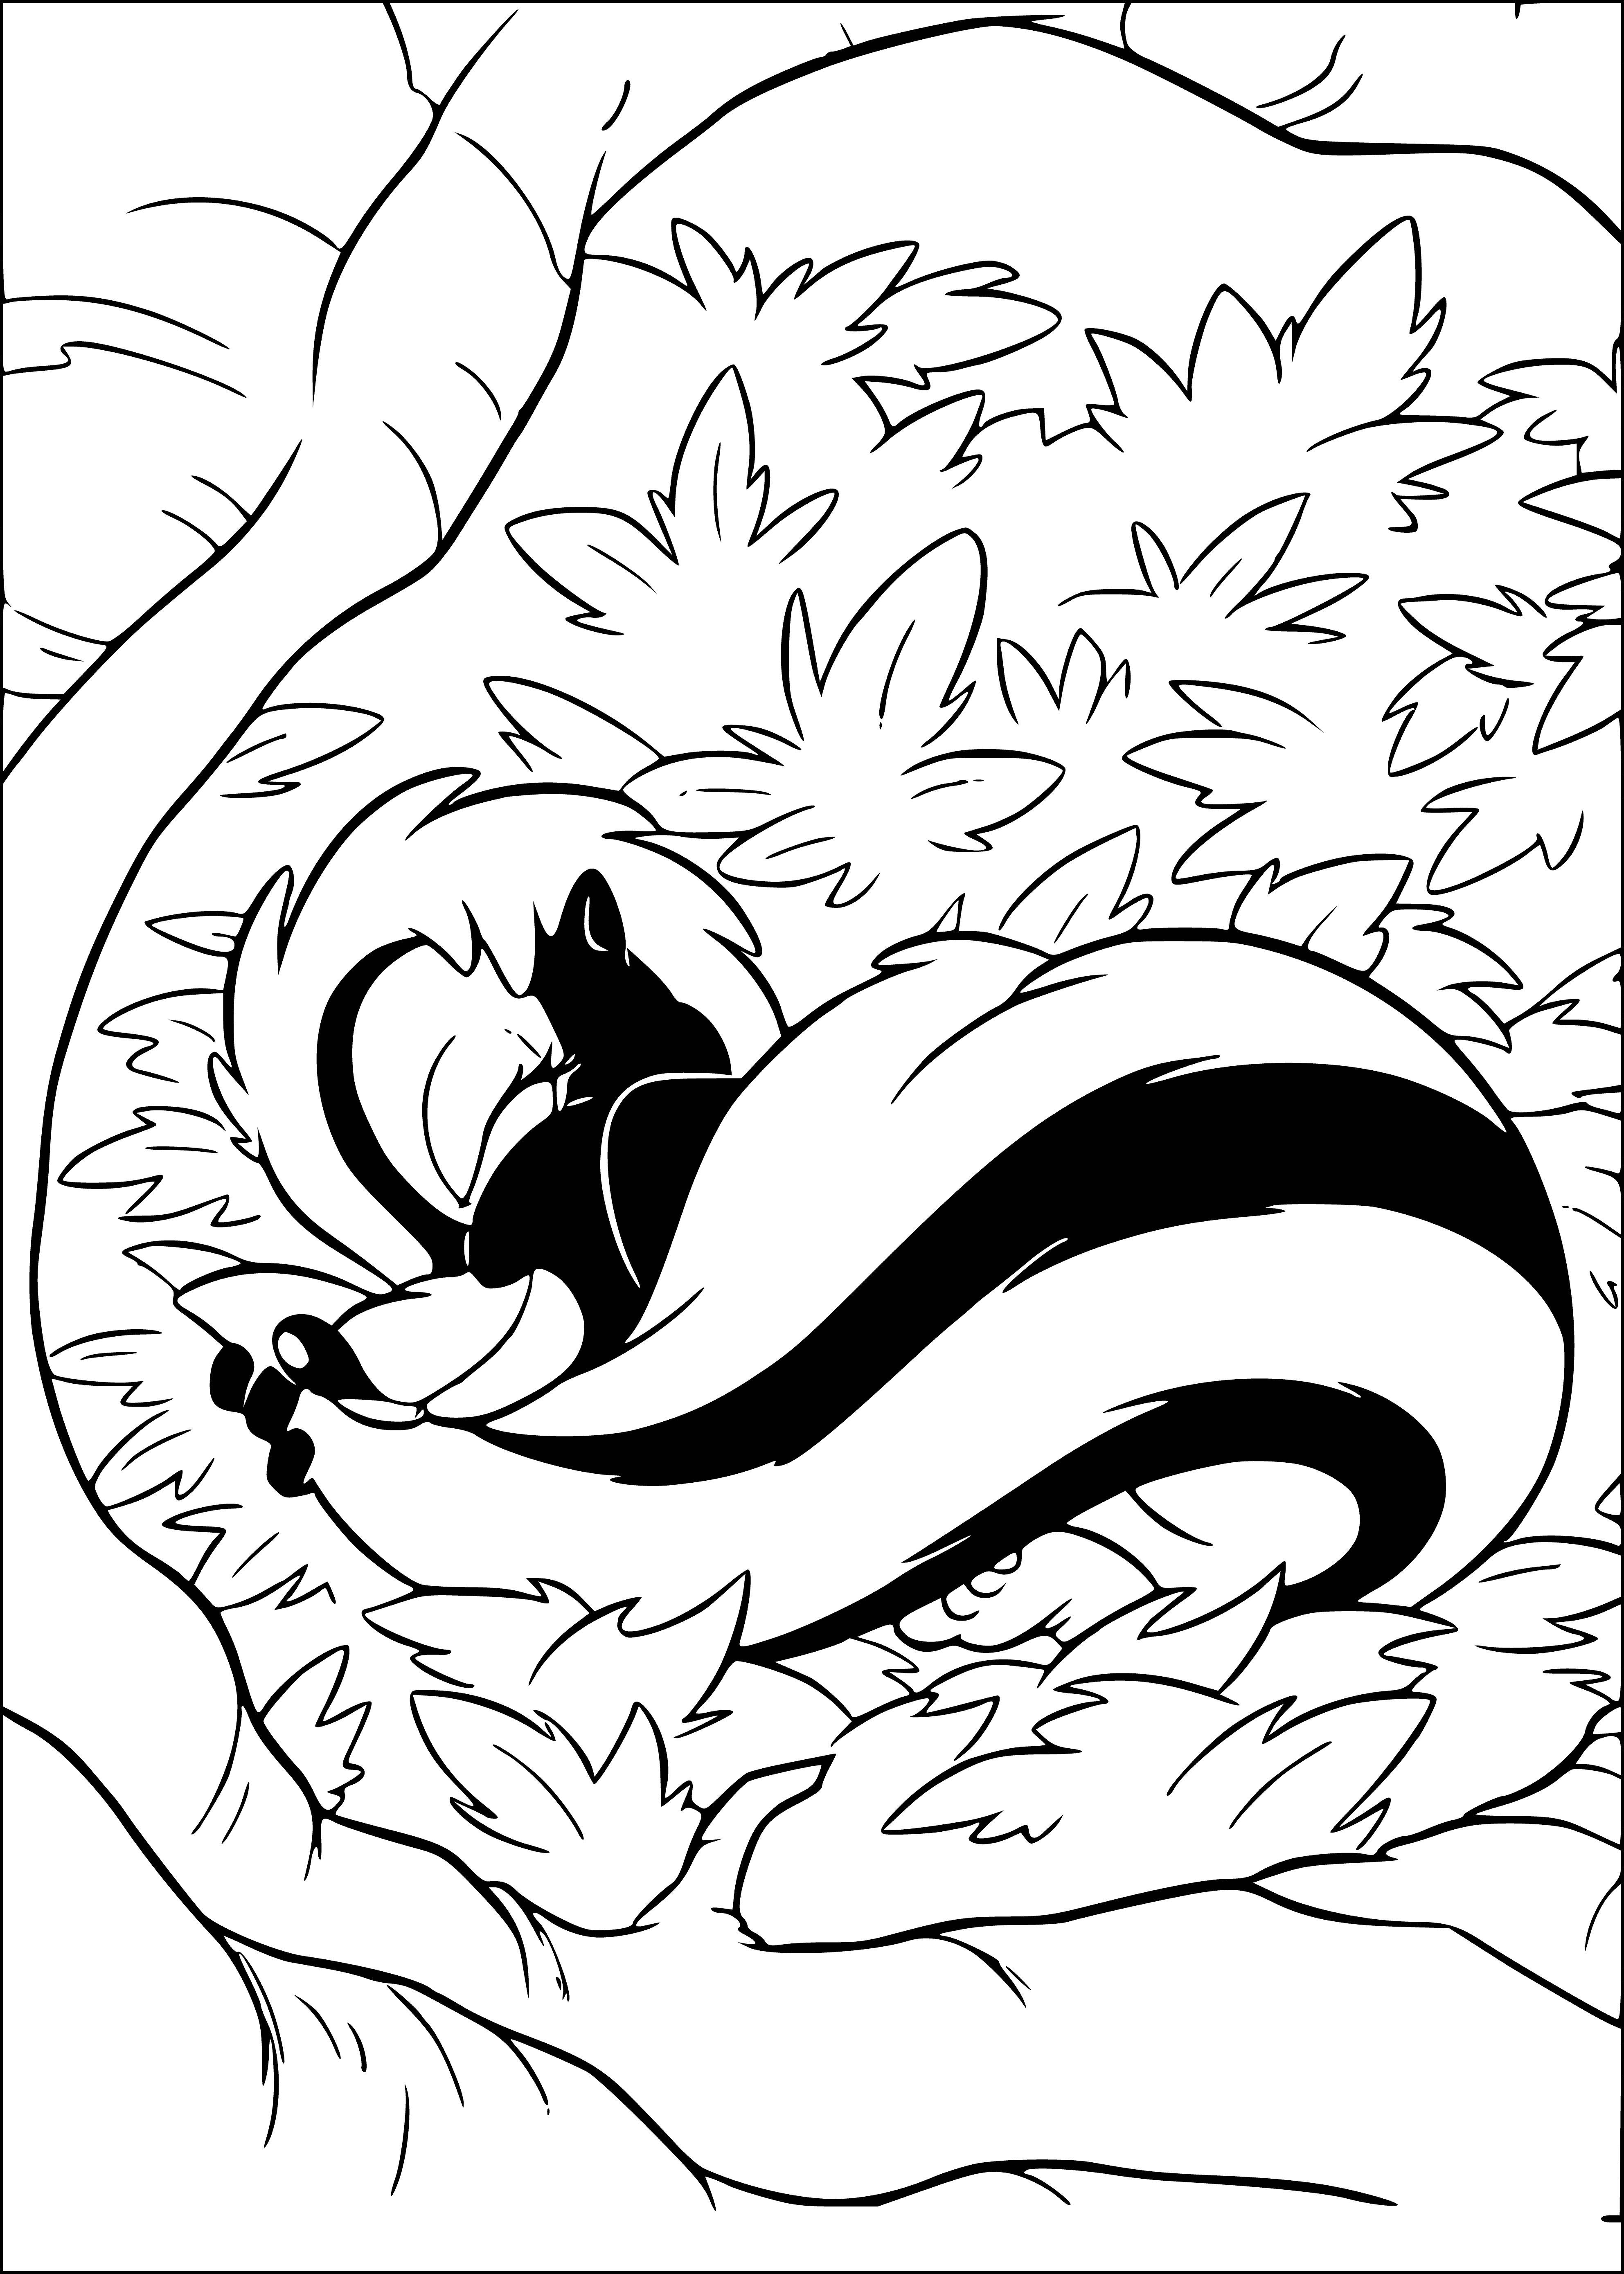 coloring page: Skunk stands on hind legs, gray & white with curled tail, black eyes & nose.